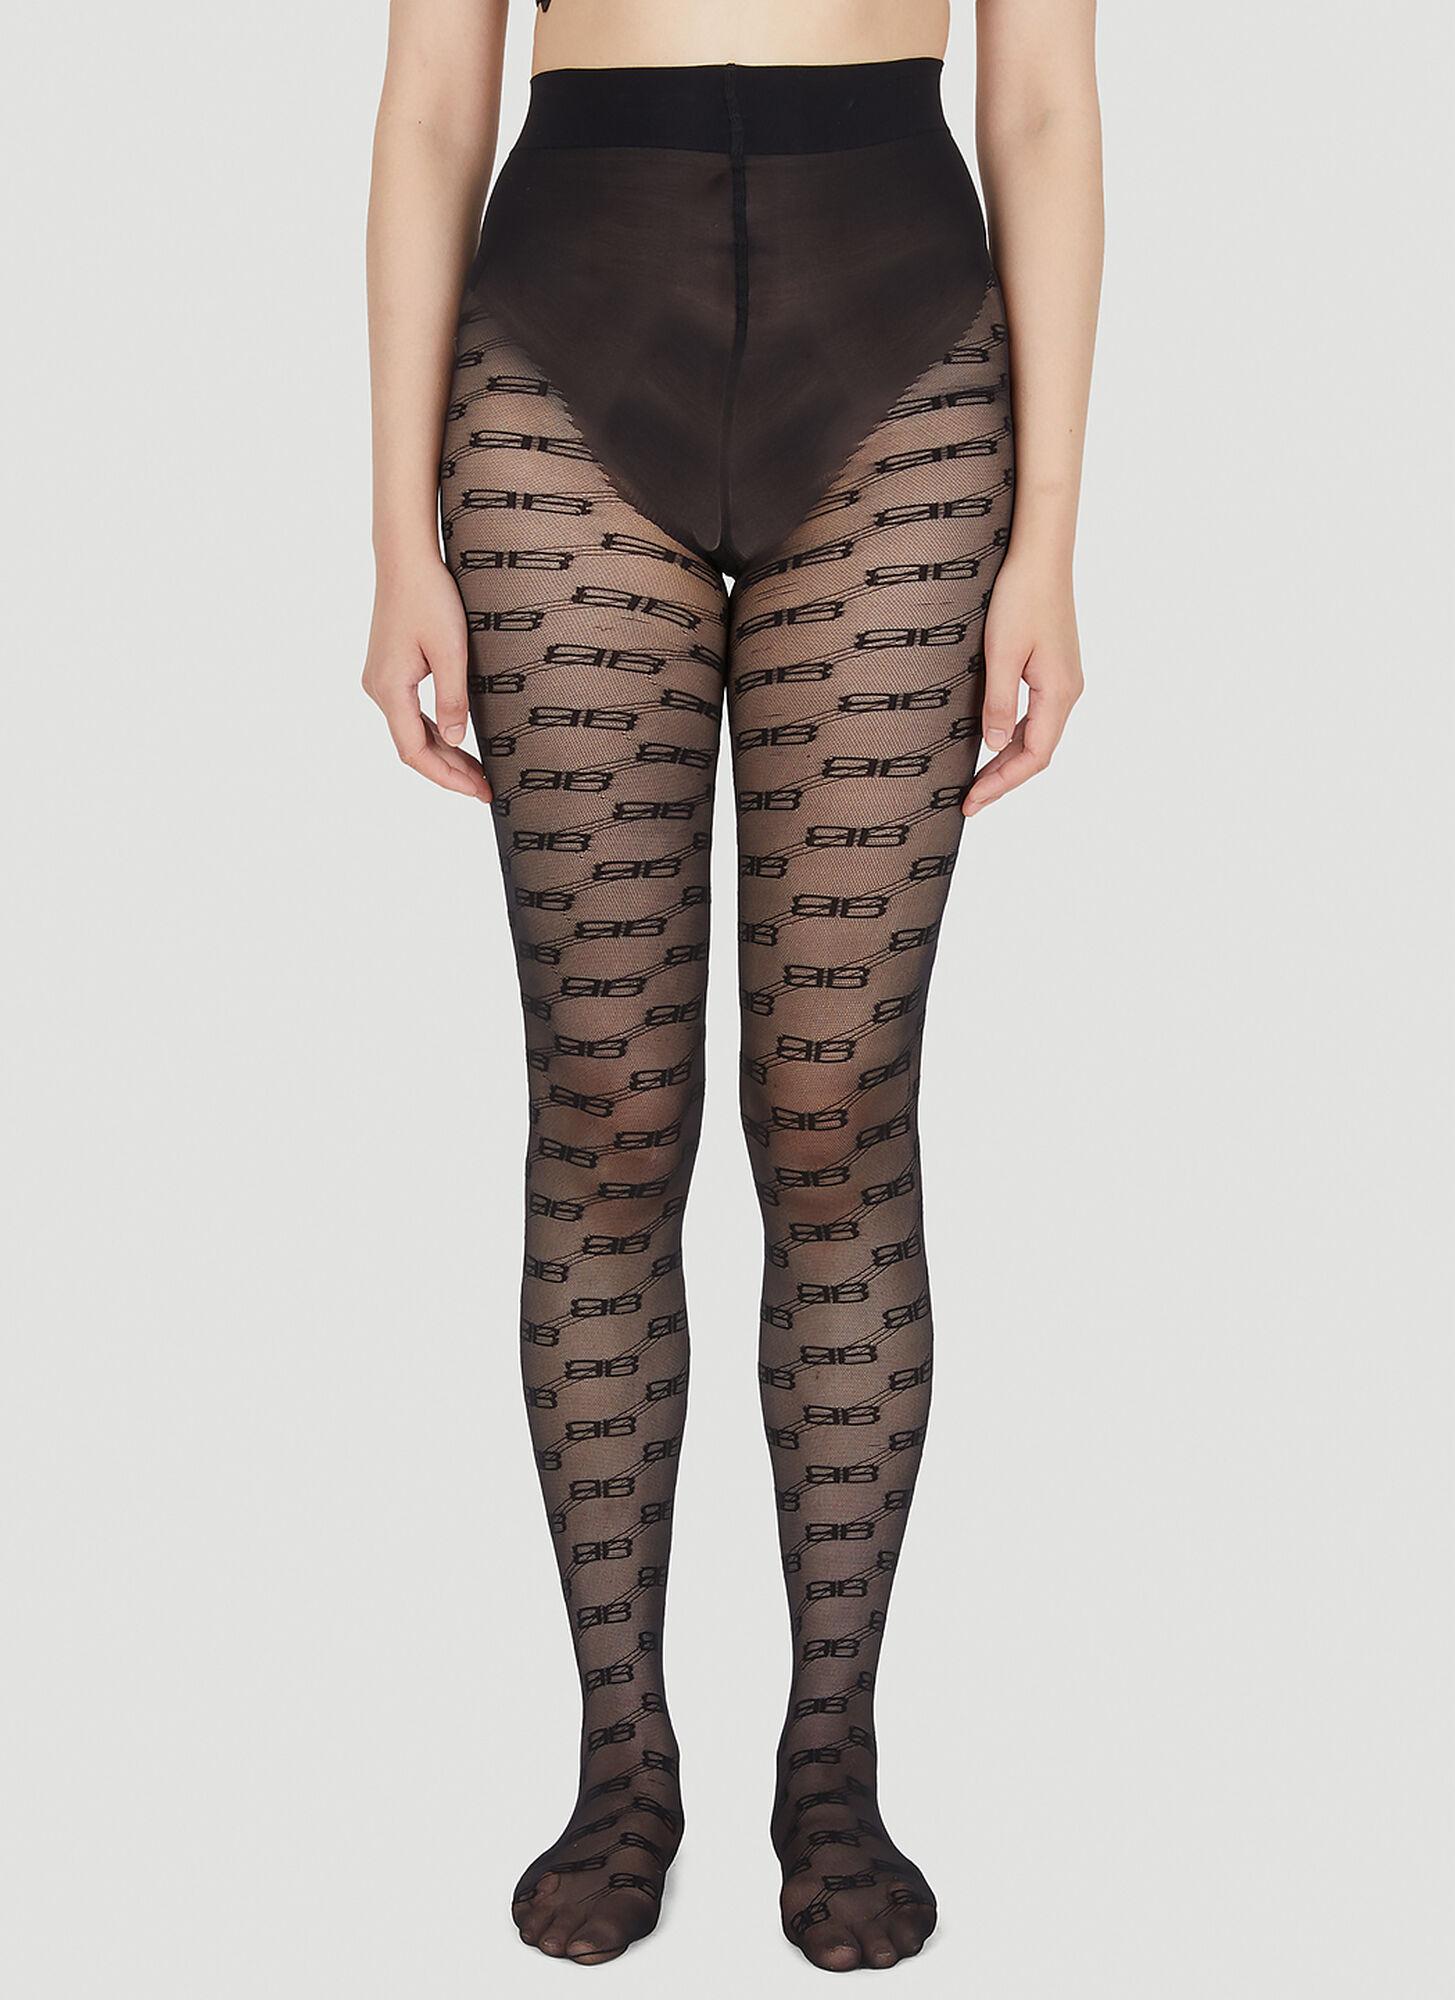 Balenciaga Bb Embroidered Tights in Black | Lyst